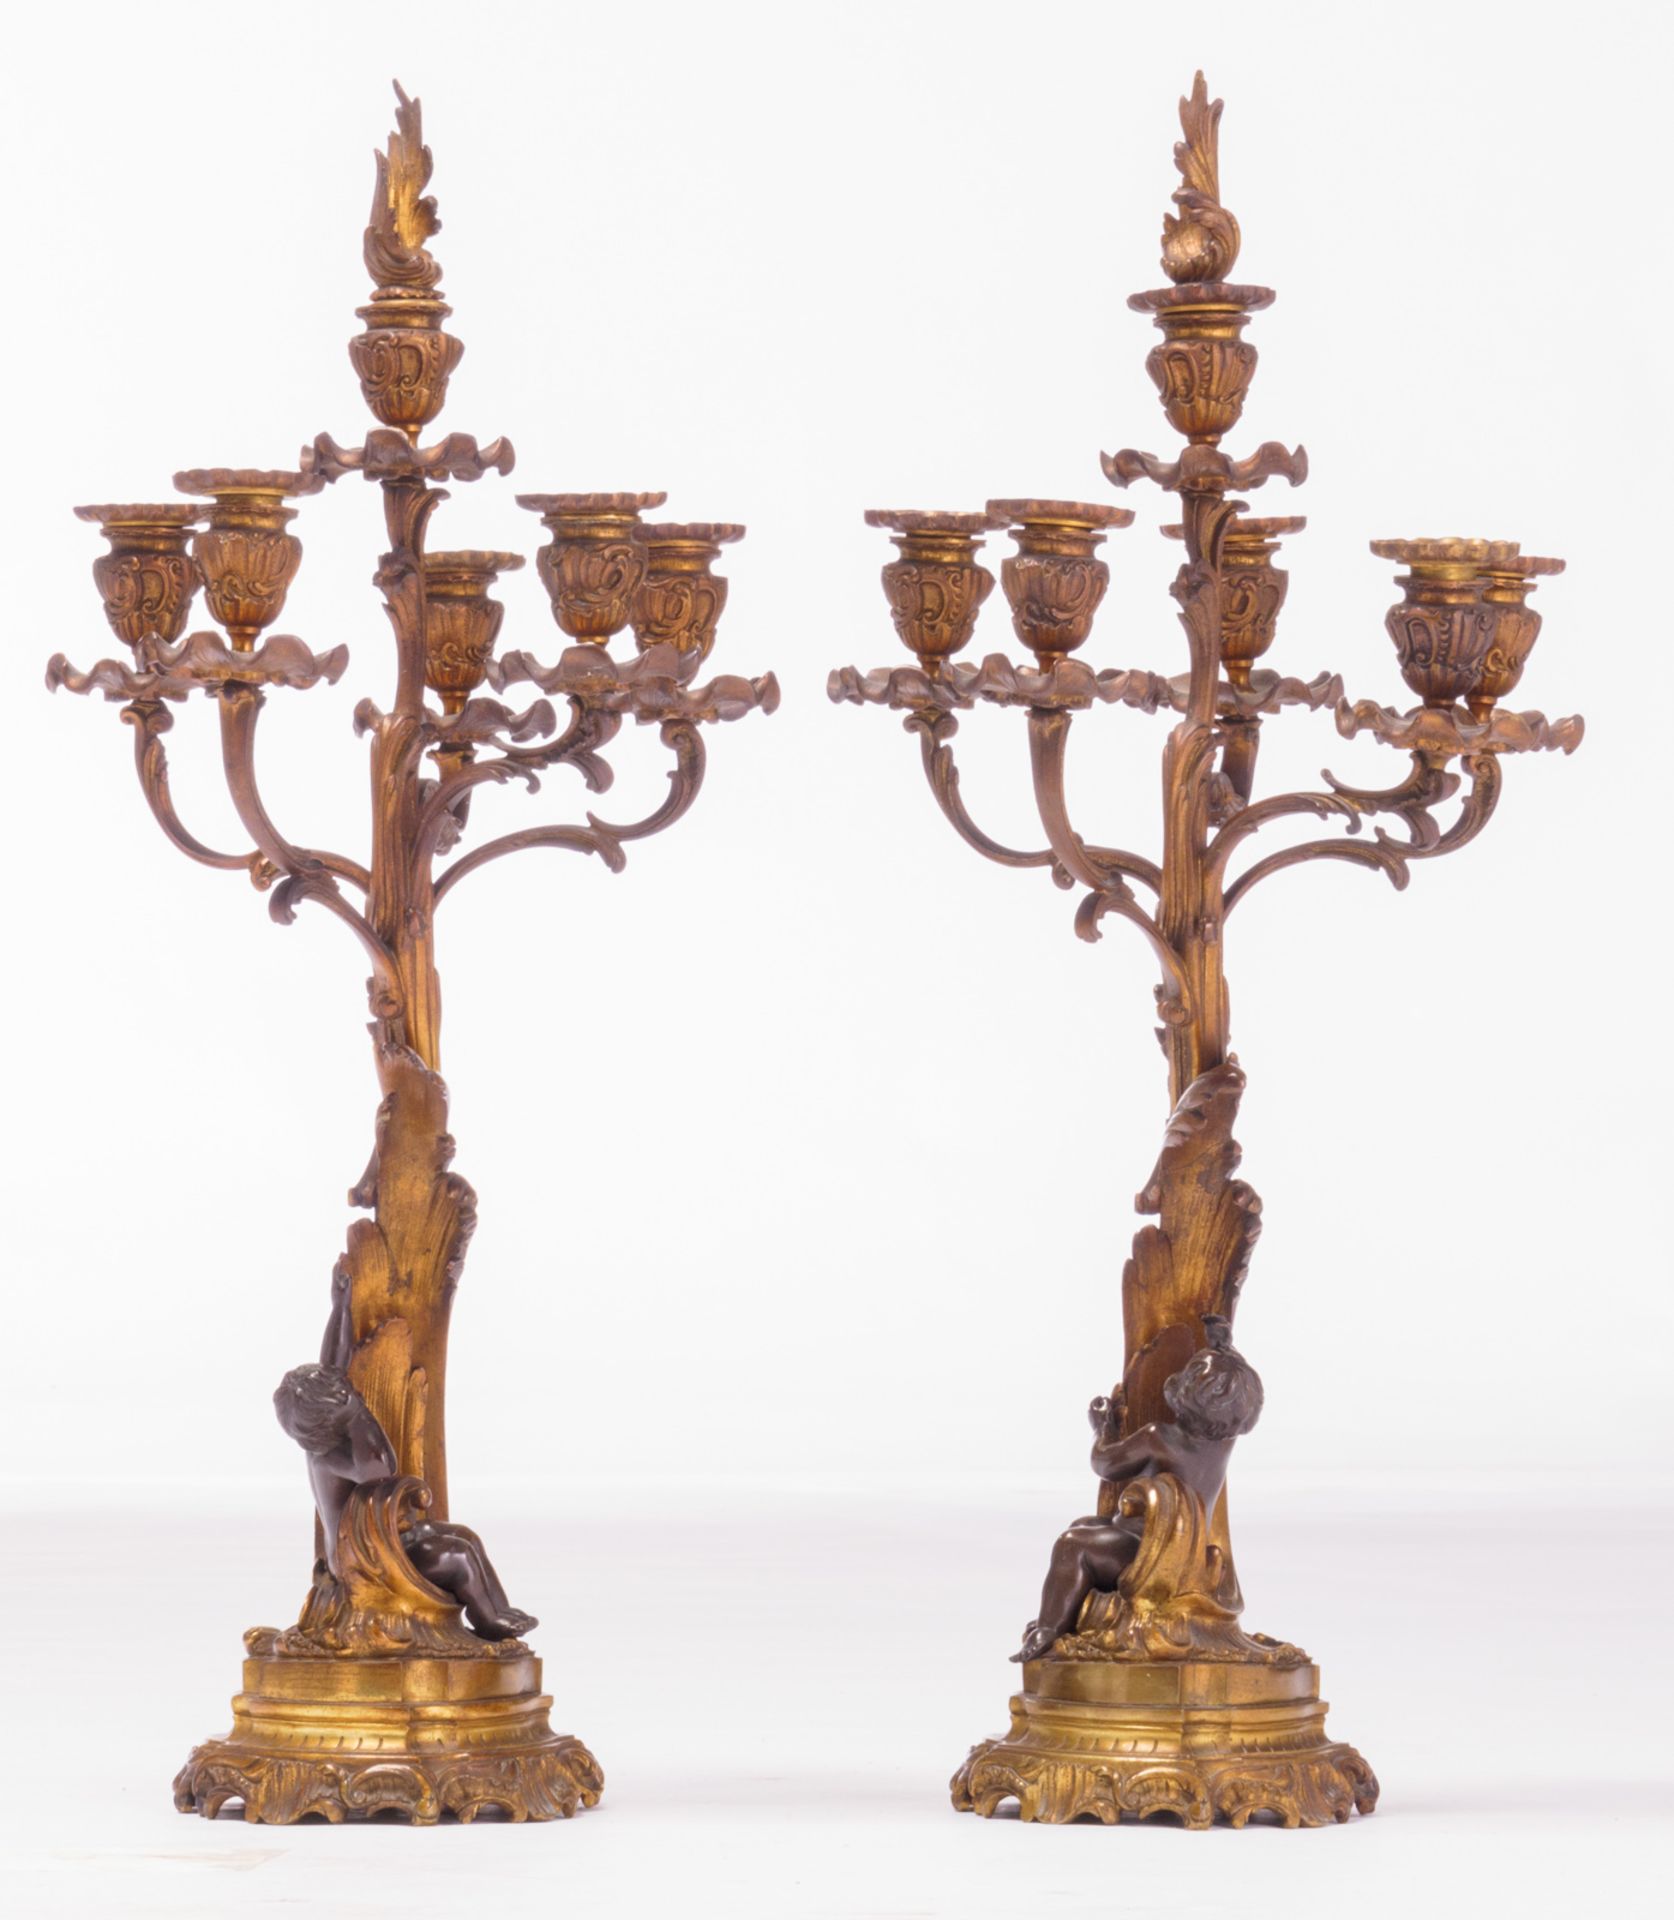 A second half of the 19thC pair of Rococo revival patinated bronze candlesticks, H 66 cm - Bild 4 aus 6